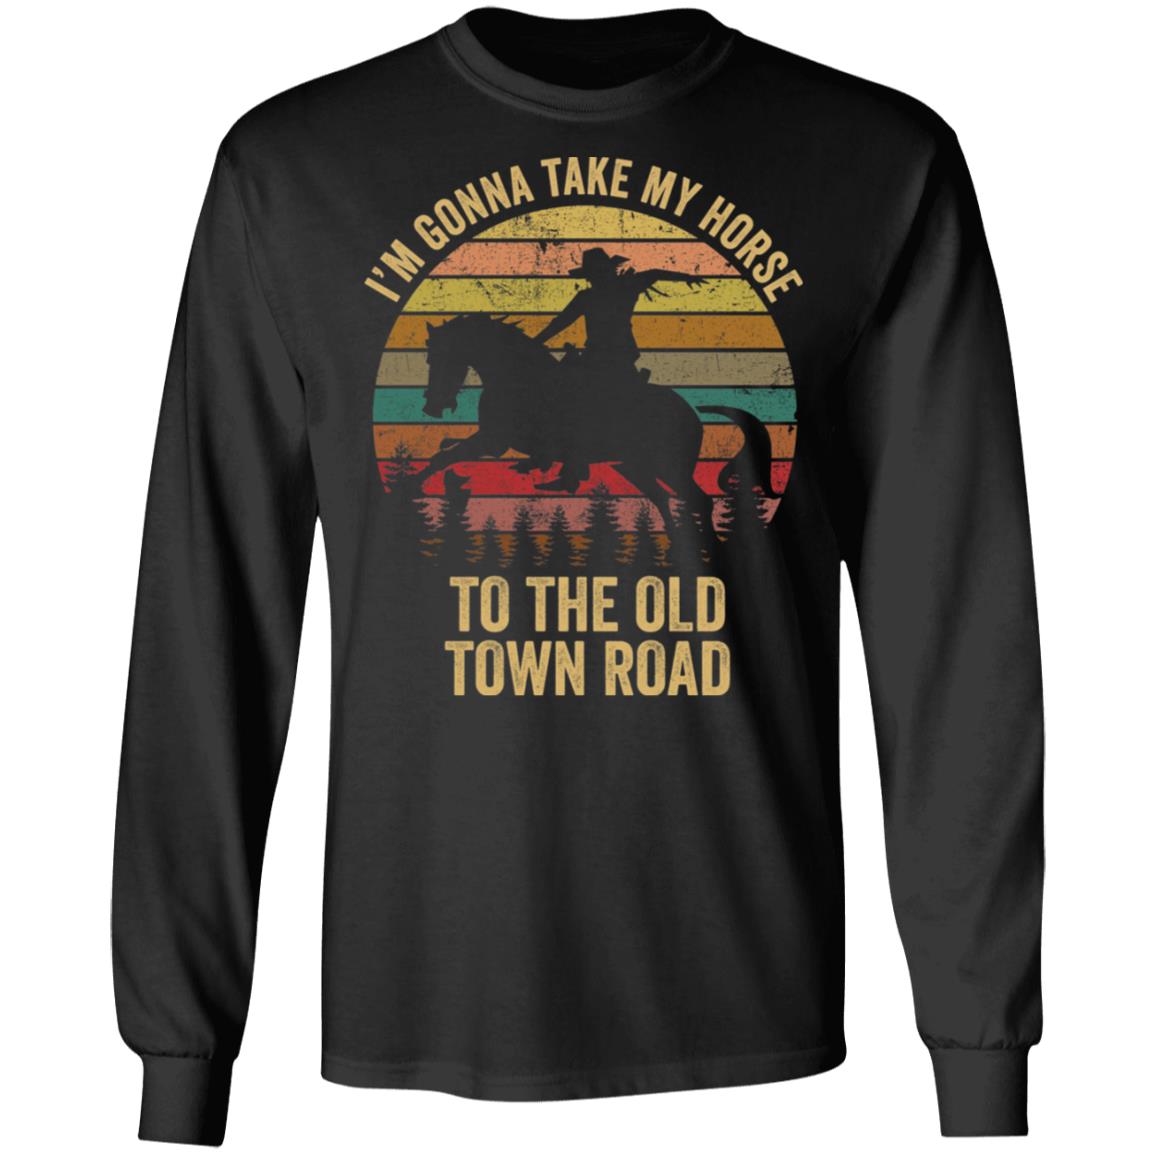 take my horse to the old town road song mp3 download